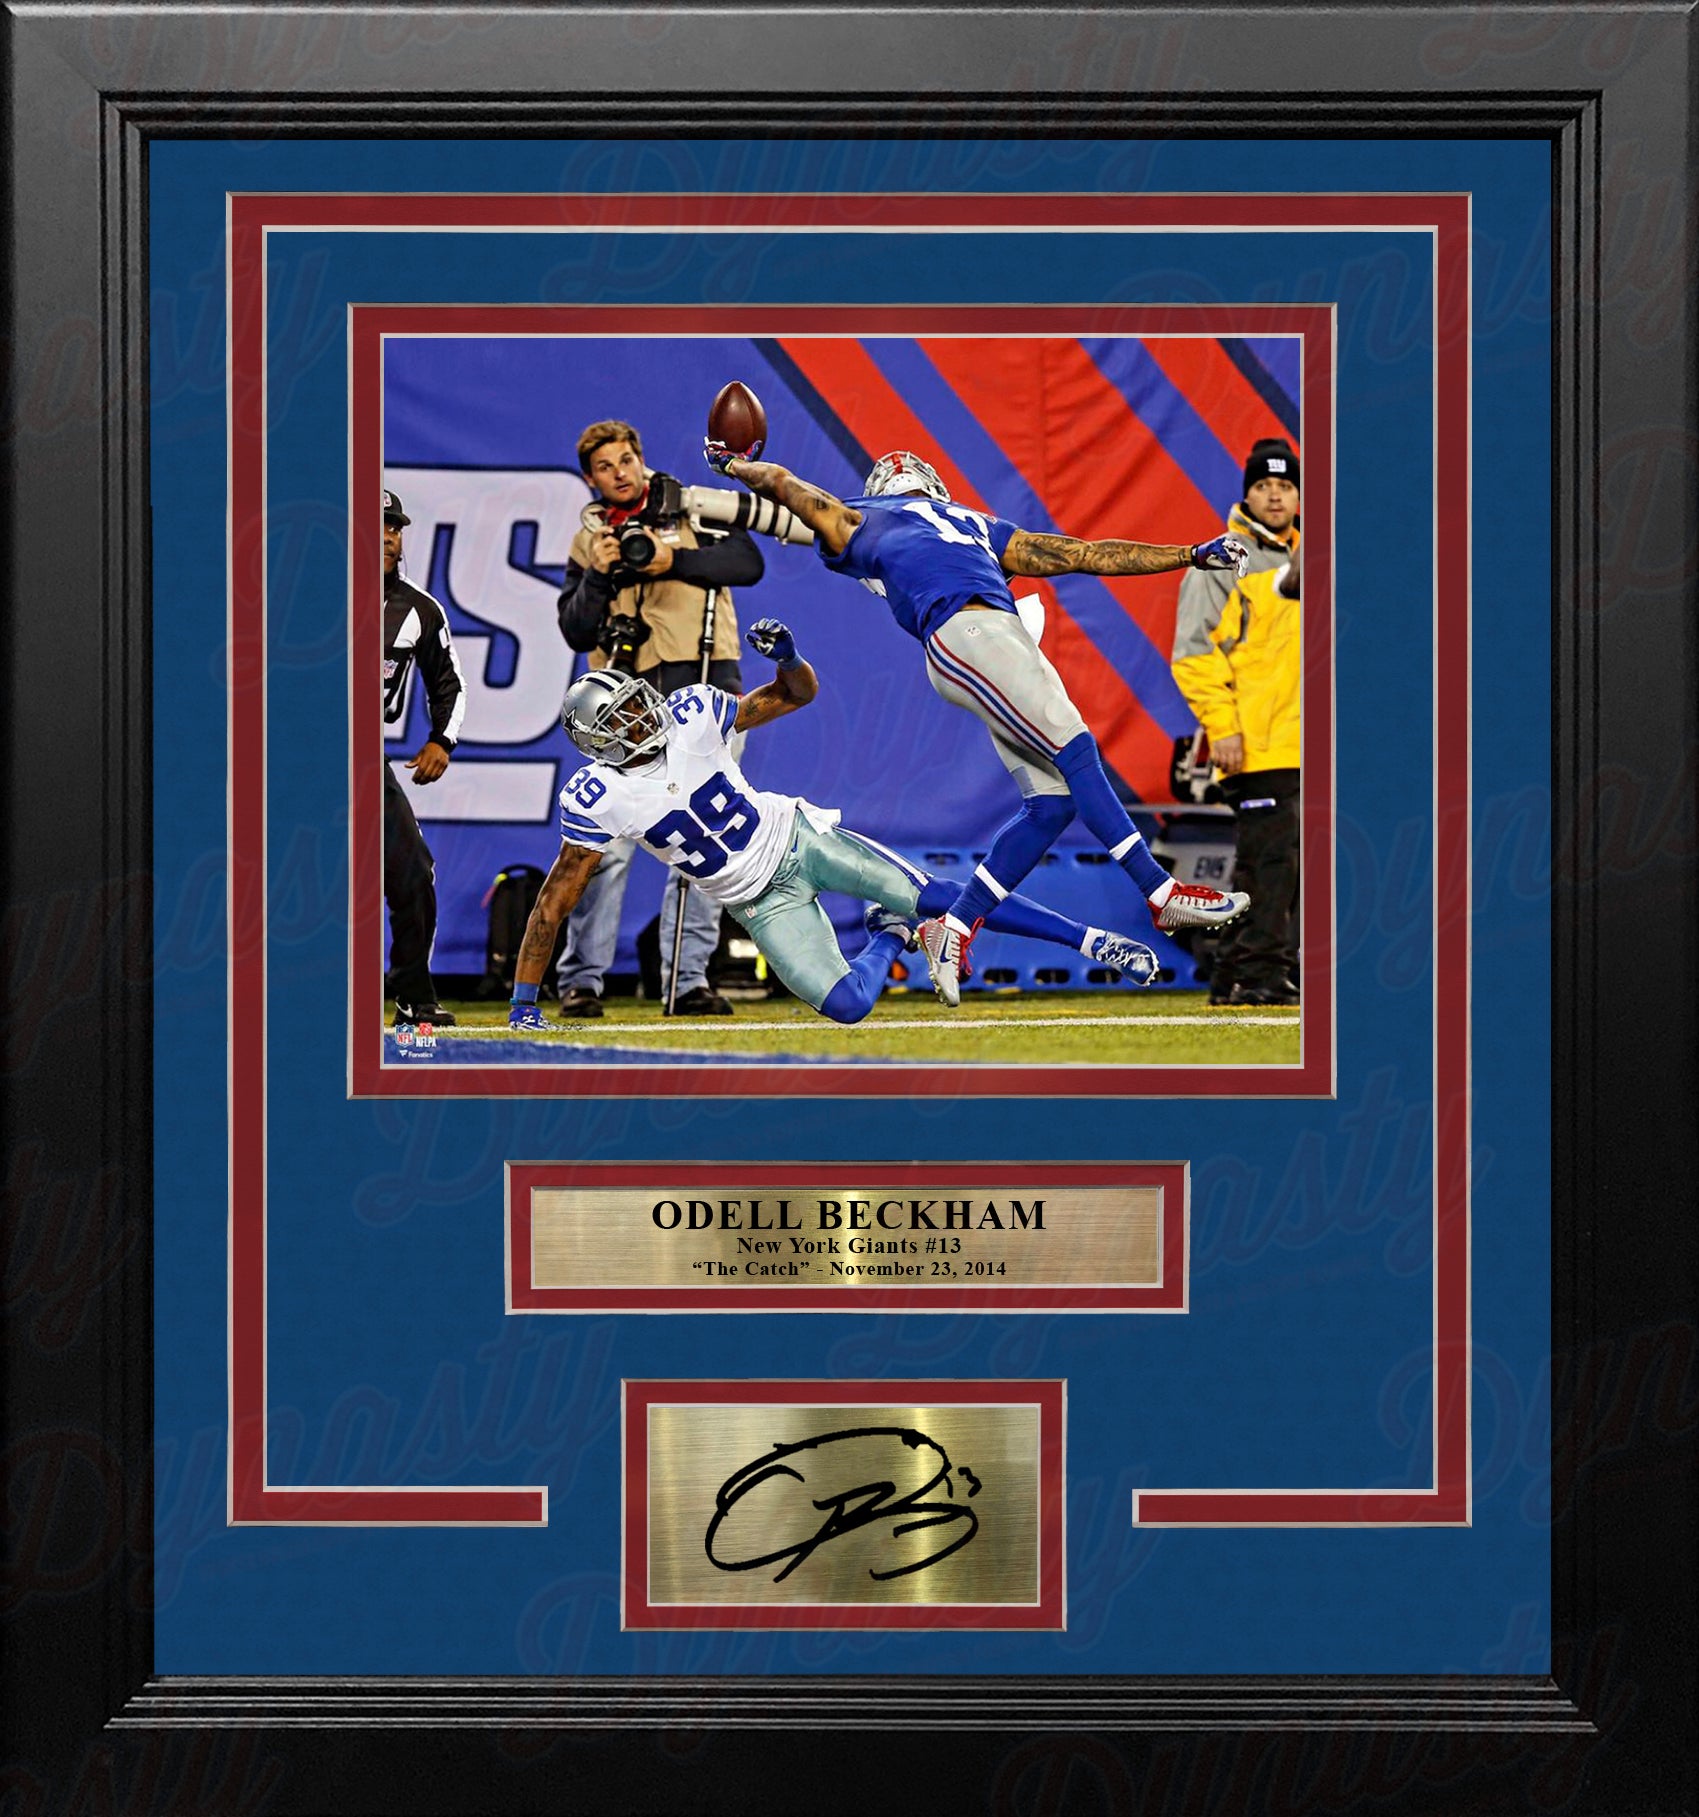 Odell Beckham One-Handed Touchdown Catch New York Giants 8x10 Framed Photo  with Engraved Autograph